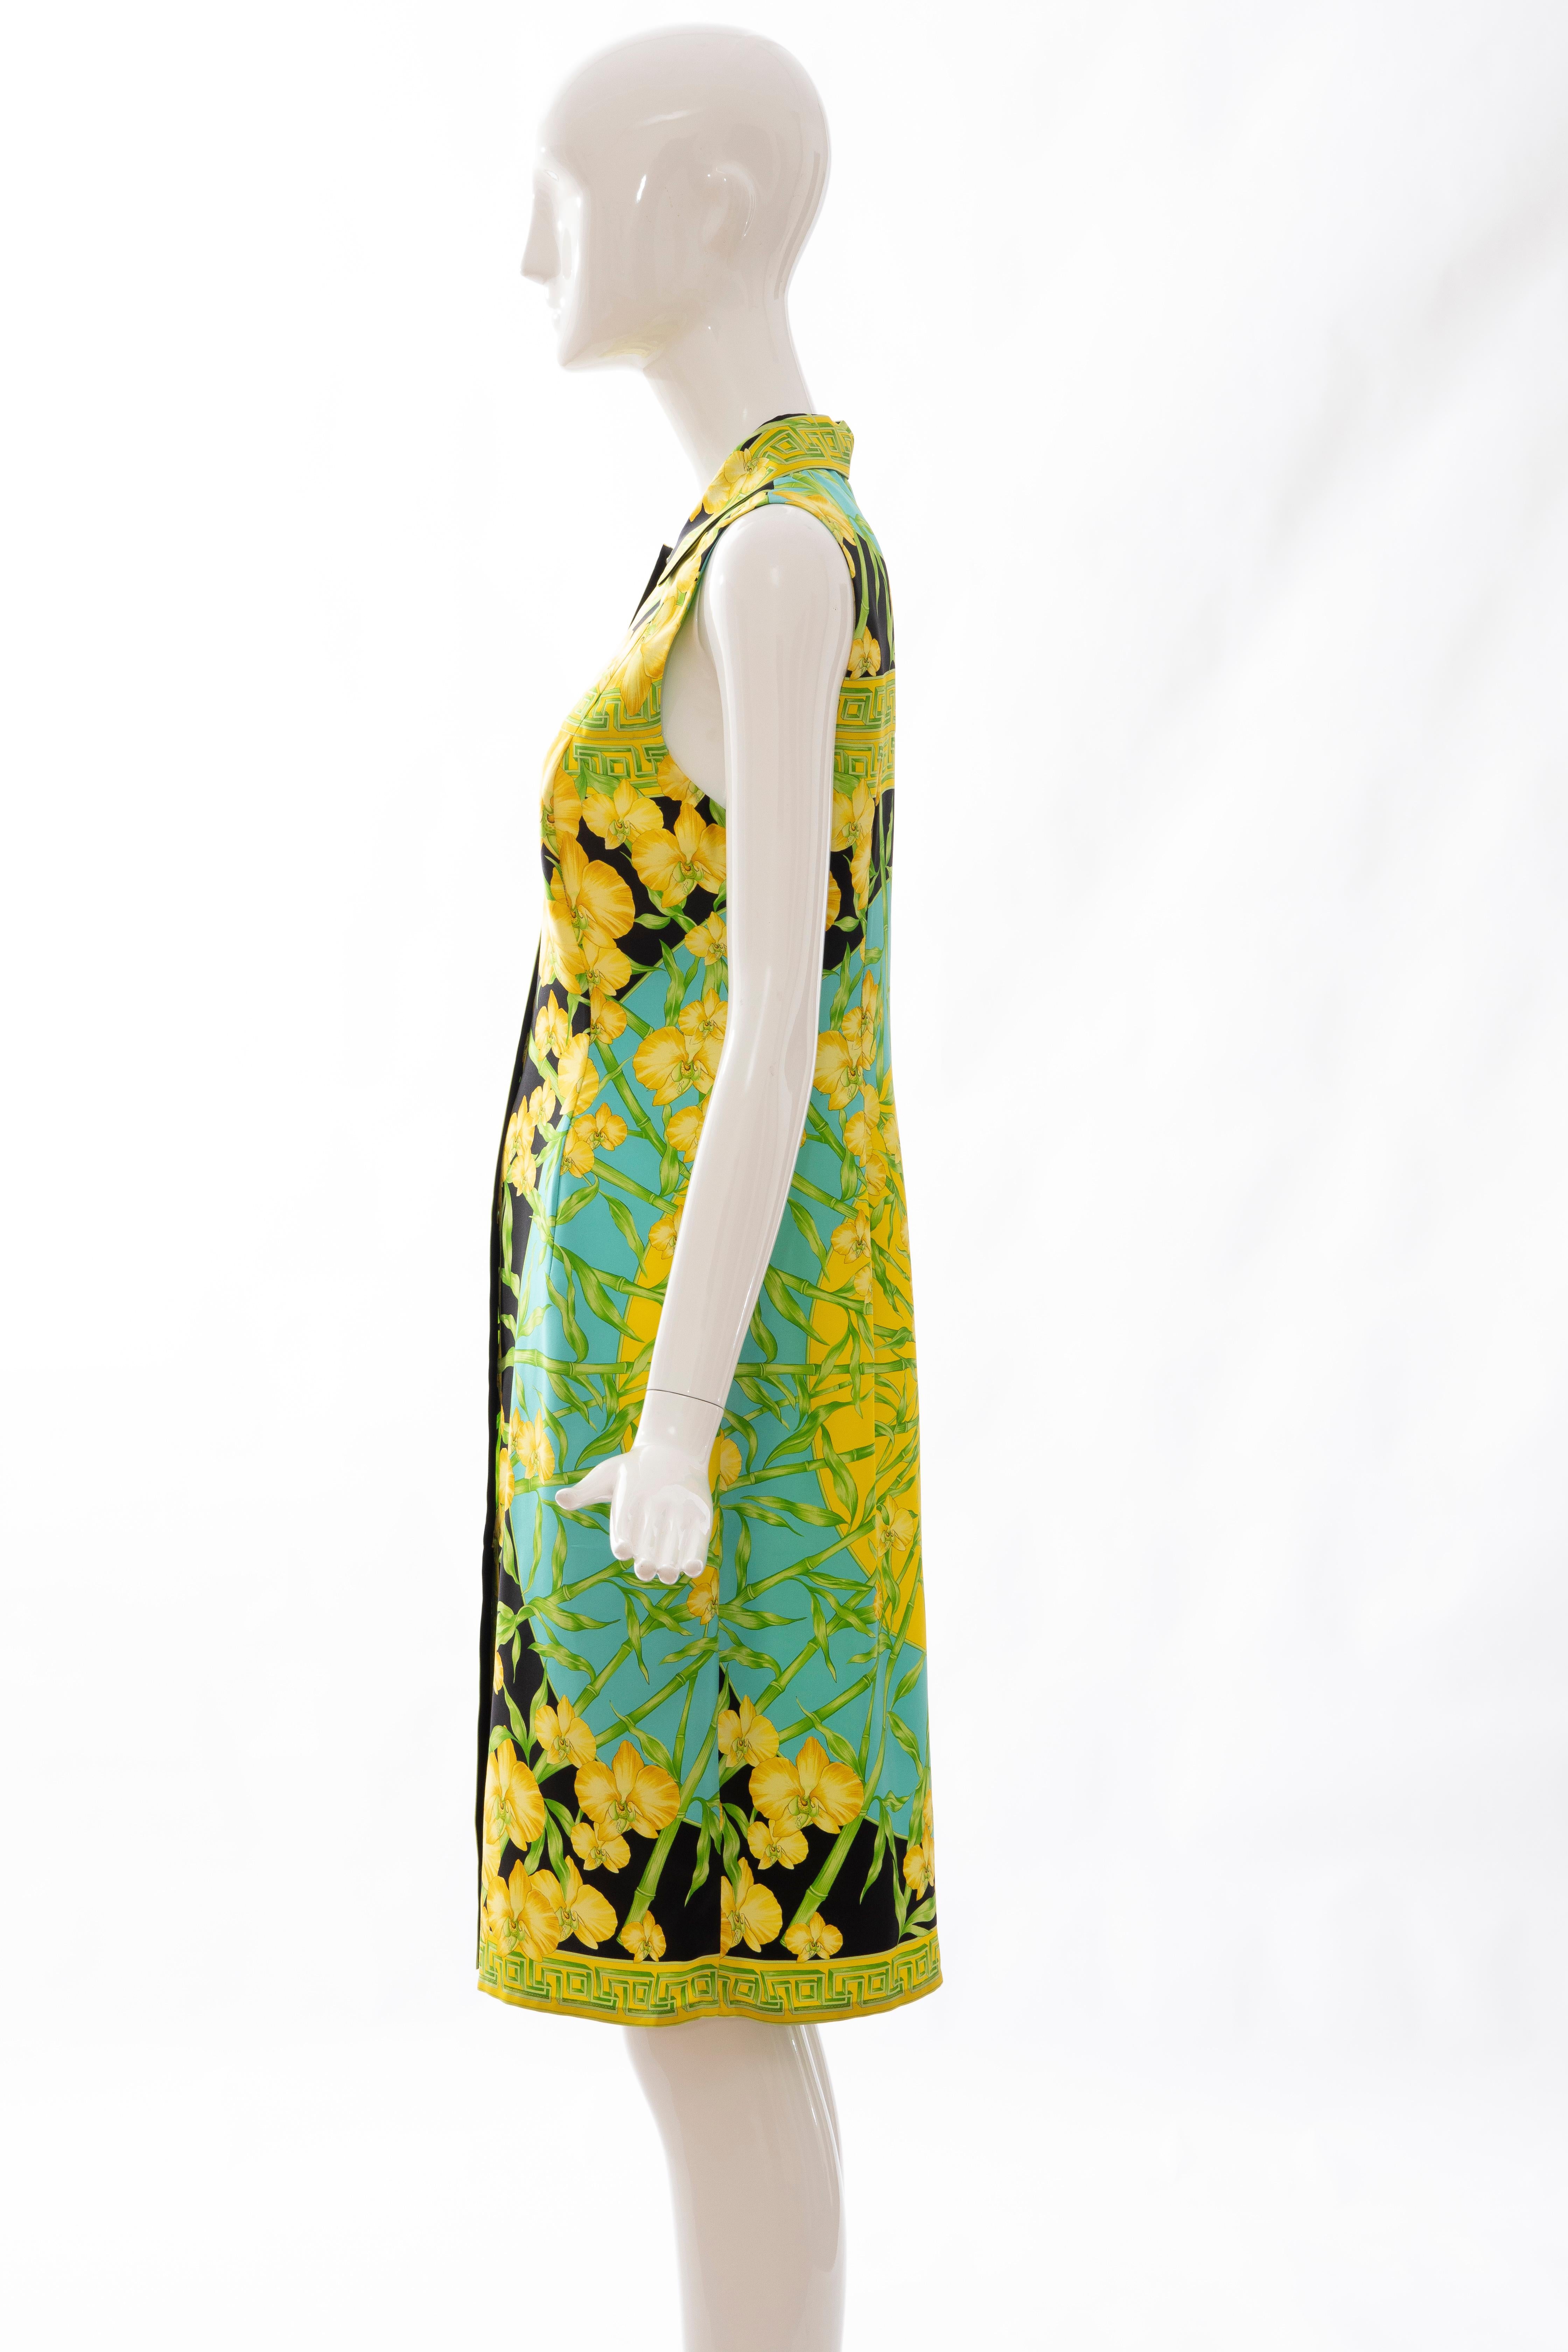 Gianni Versace Couture Silk Printed Yellow Orchids Sheath Dress, Circa: 1990's 4